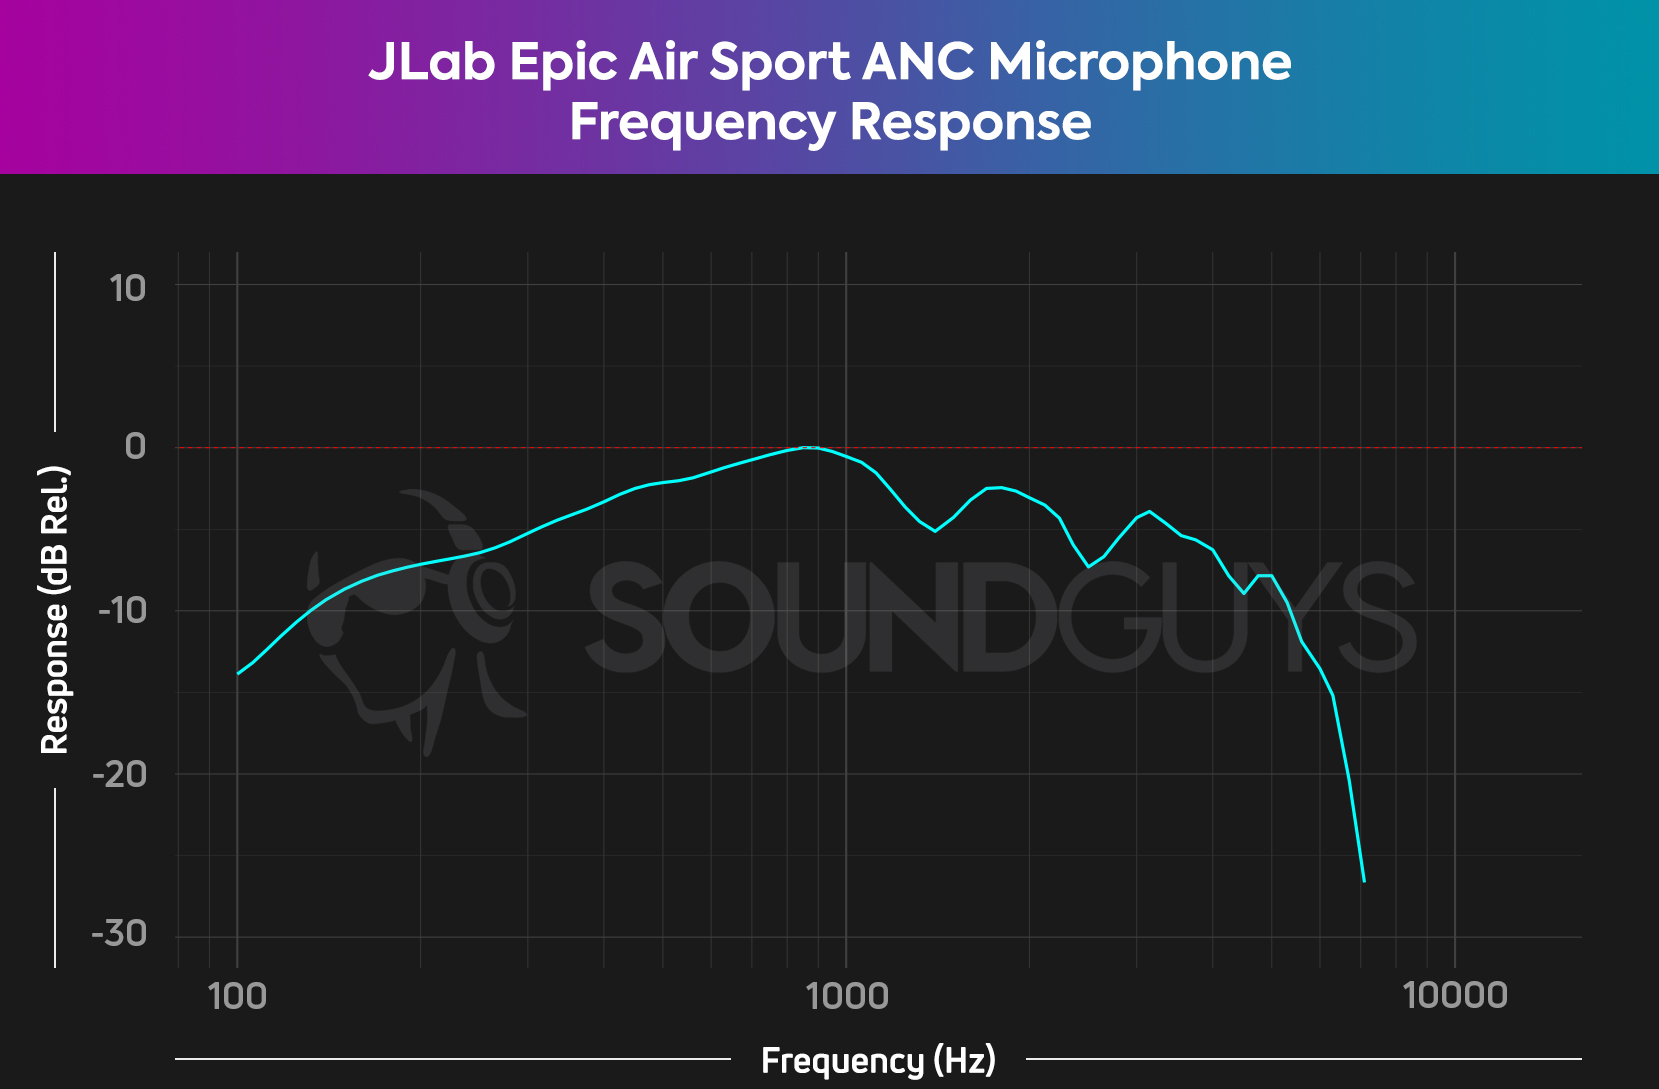 The JLab Epic Air Sport ANC microphone frequency response chart depicts an under-emphasized response from 100-700Hz